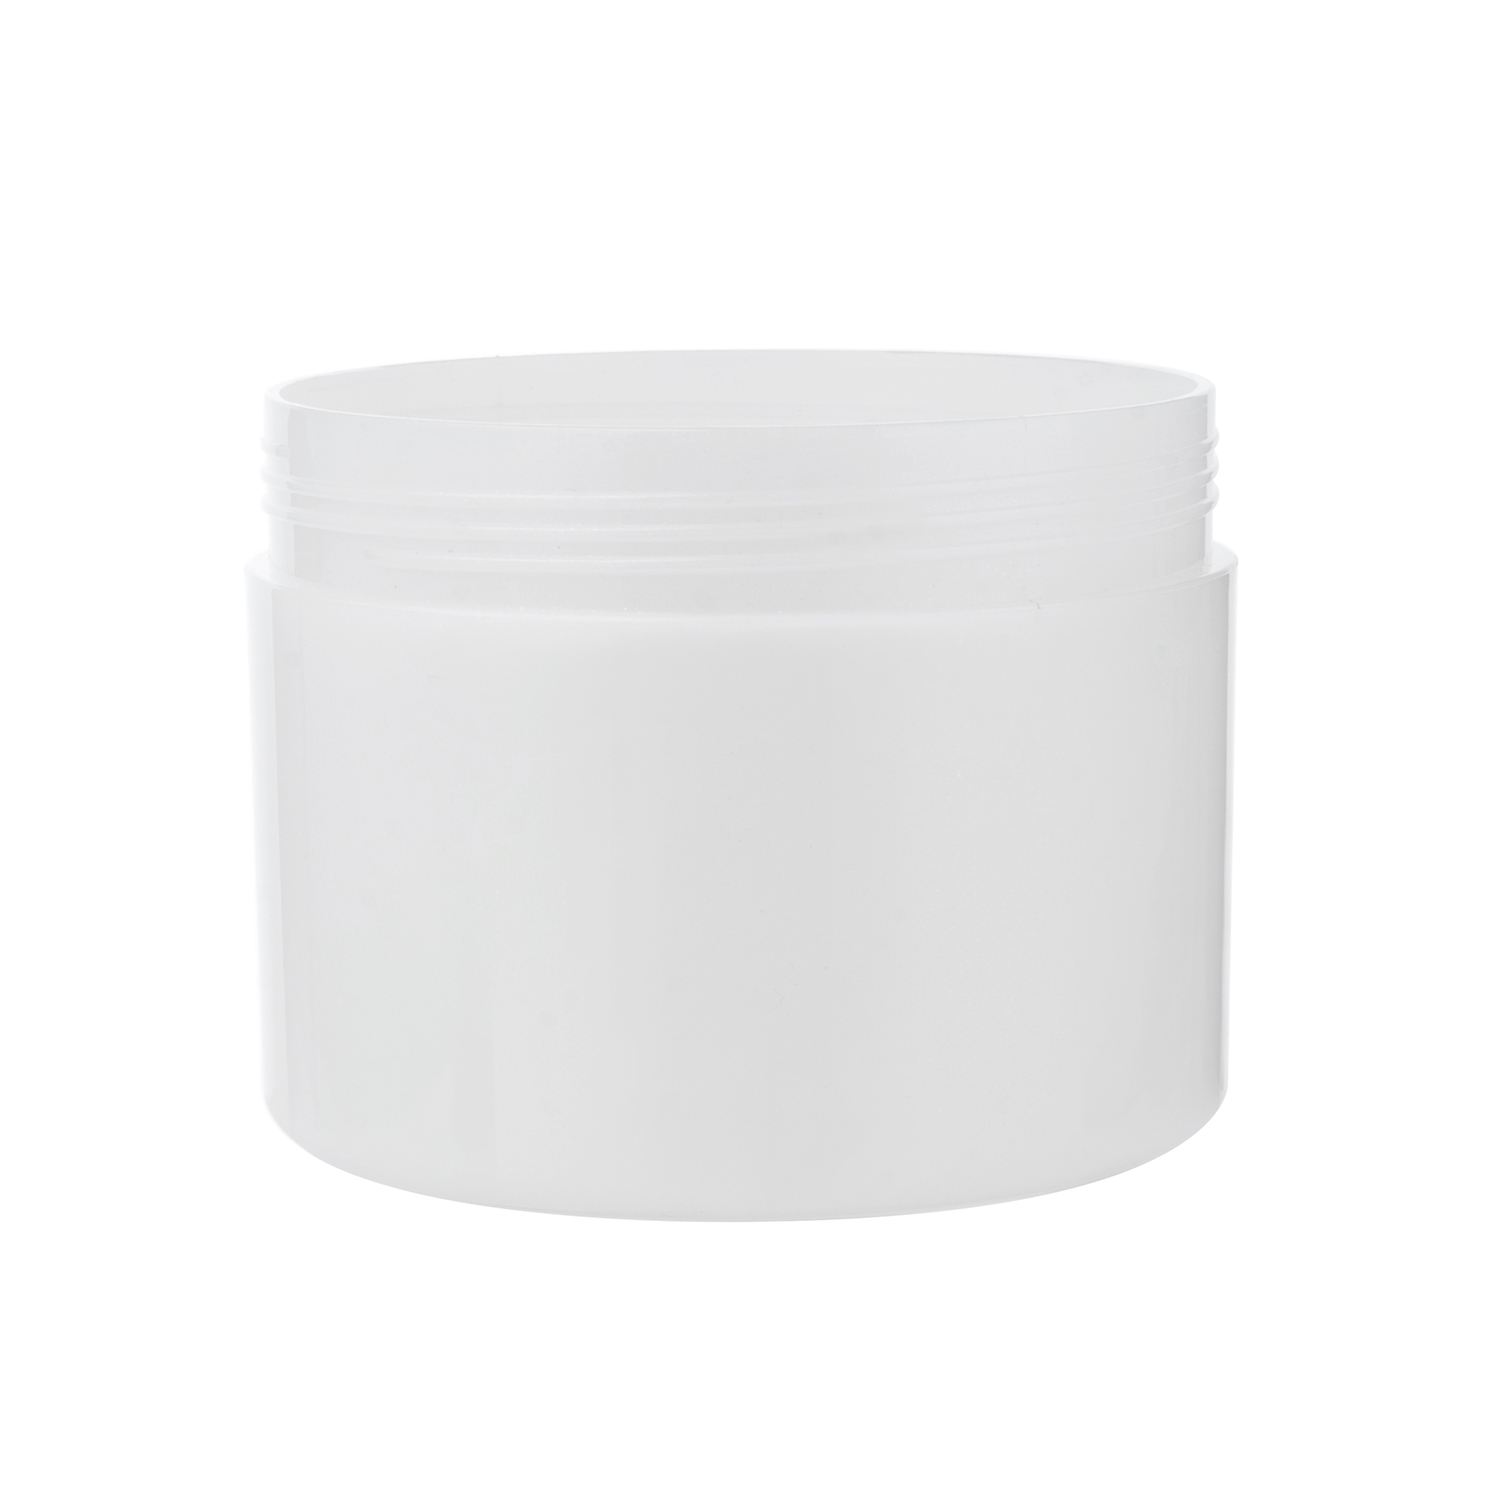 500ml Wide Mouth Plastic Jars with Screw Top Lids Wholesale